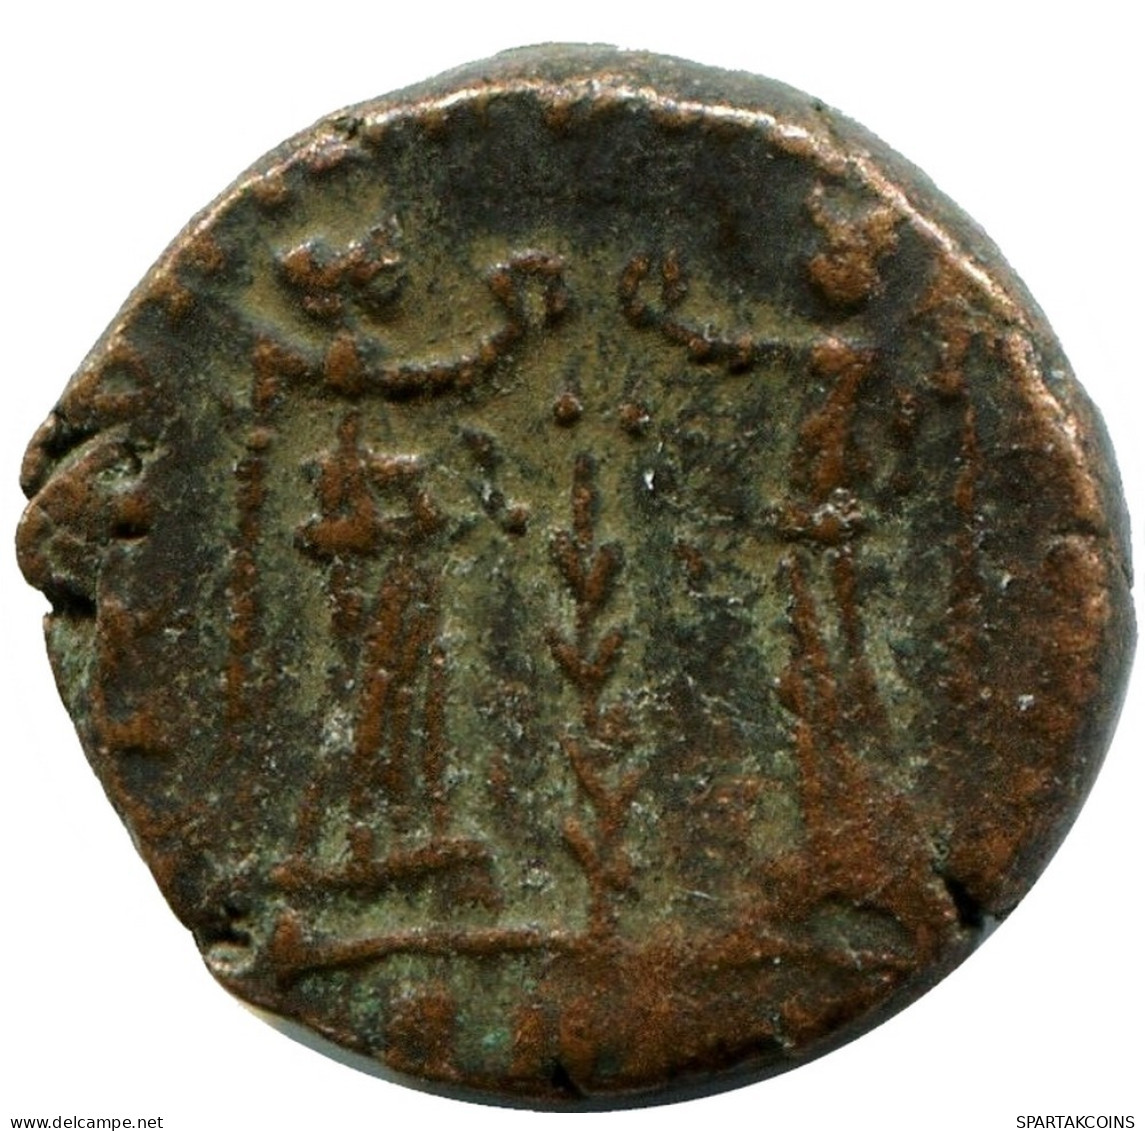 CONSTANS MINTED IN ROME ITALY FROM THE ROYAL ONTARIO MUSEUM #ANC11503.14.U.A - Der Christlischen Kaiser (307 / 363)